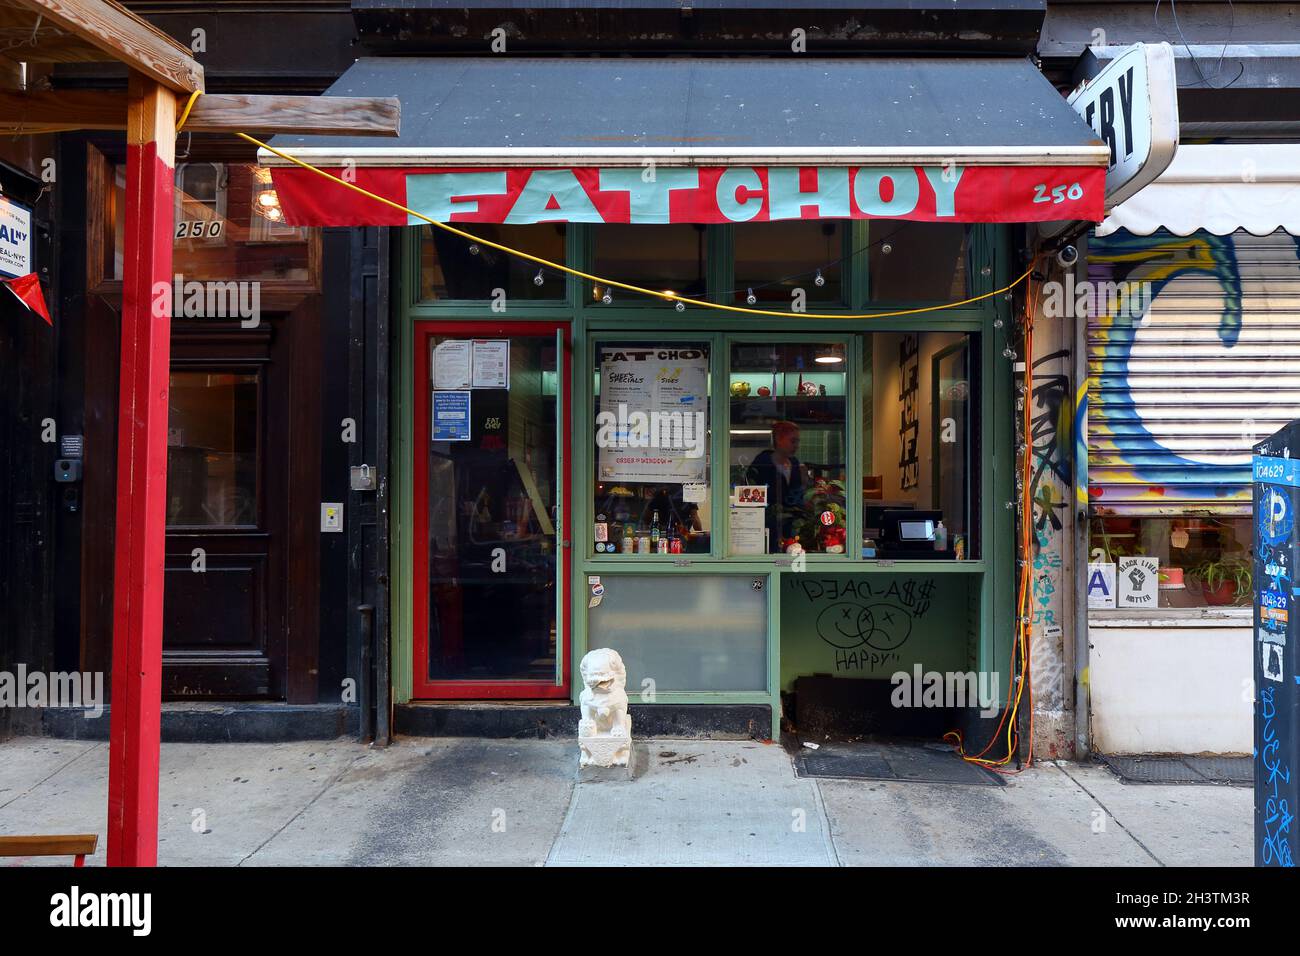 Fat Choy, 250 Broome St, New York, NYC storefront photo of a vegan, plant-based Chinese eatery in the Lower East Side neighborhood. Stock Photo